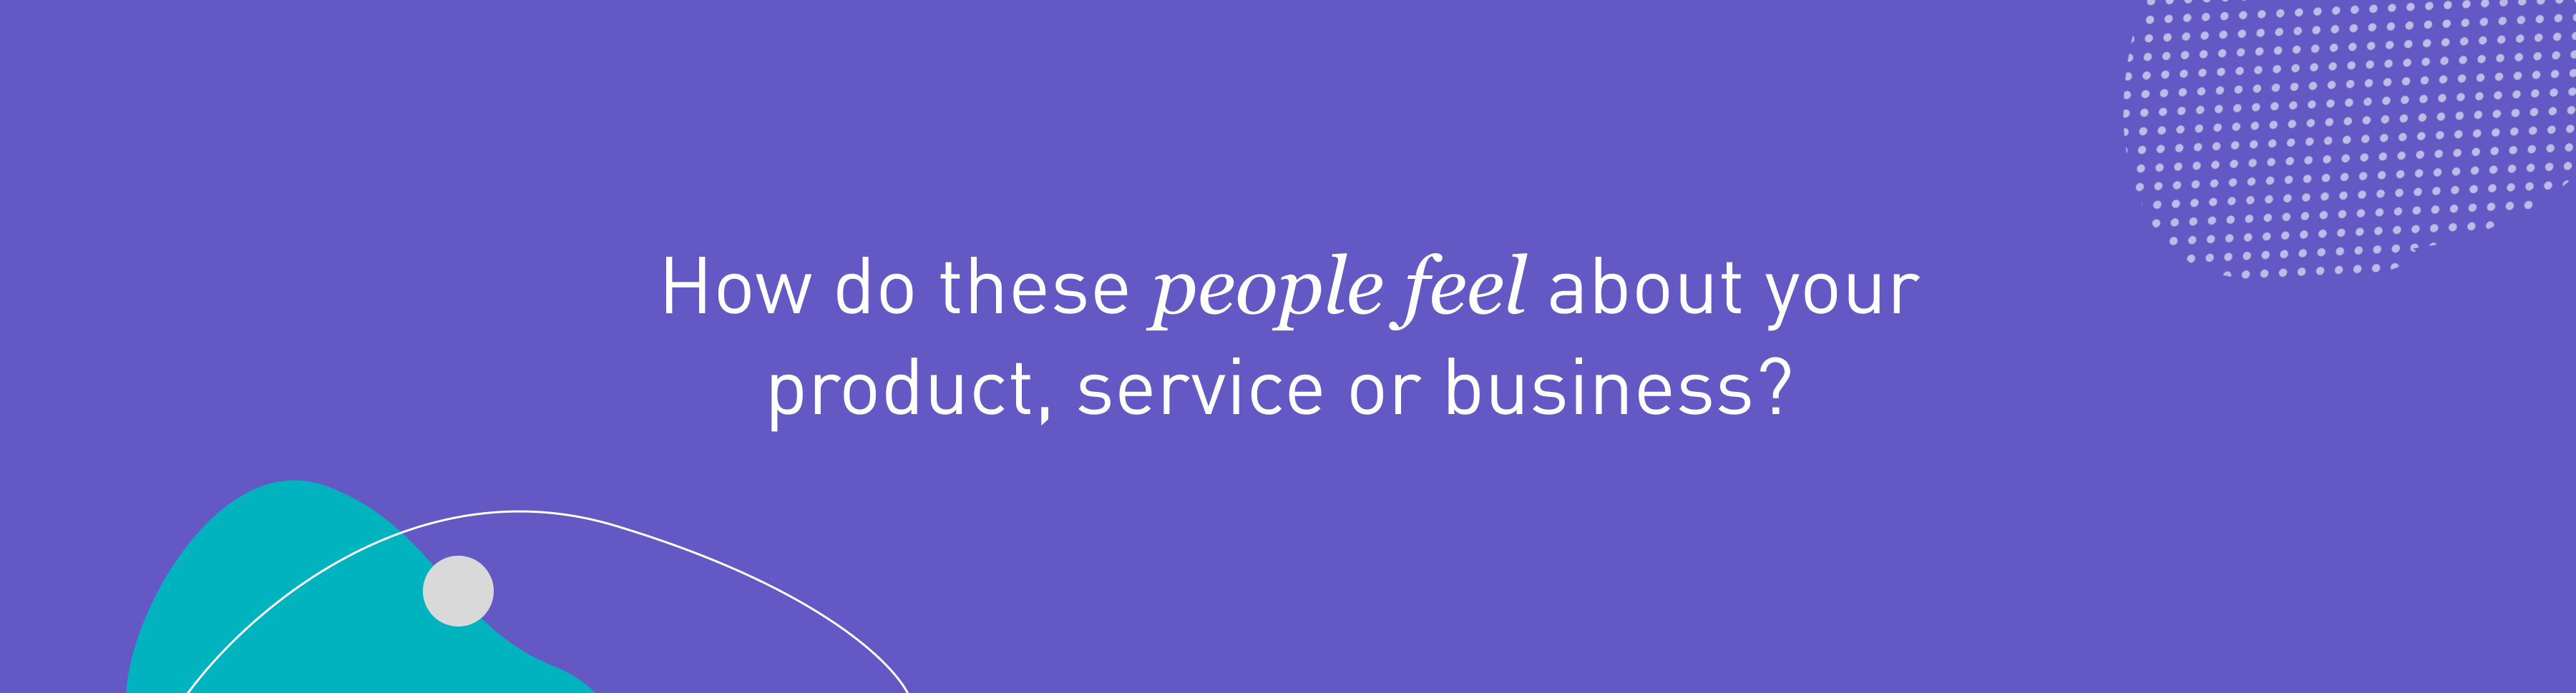 How do these people feel about your product, service or business. What is the sentiment?